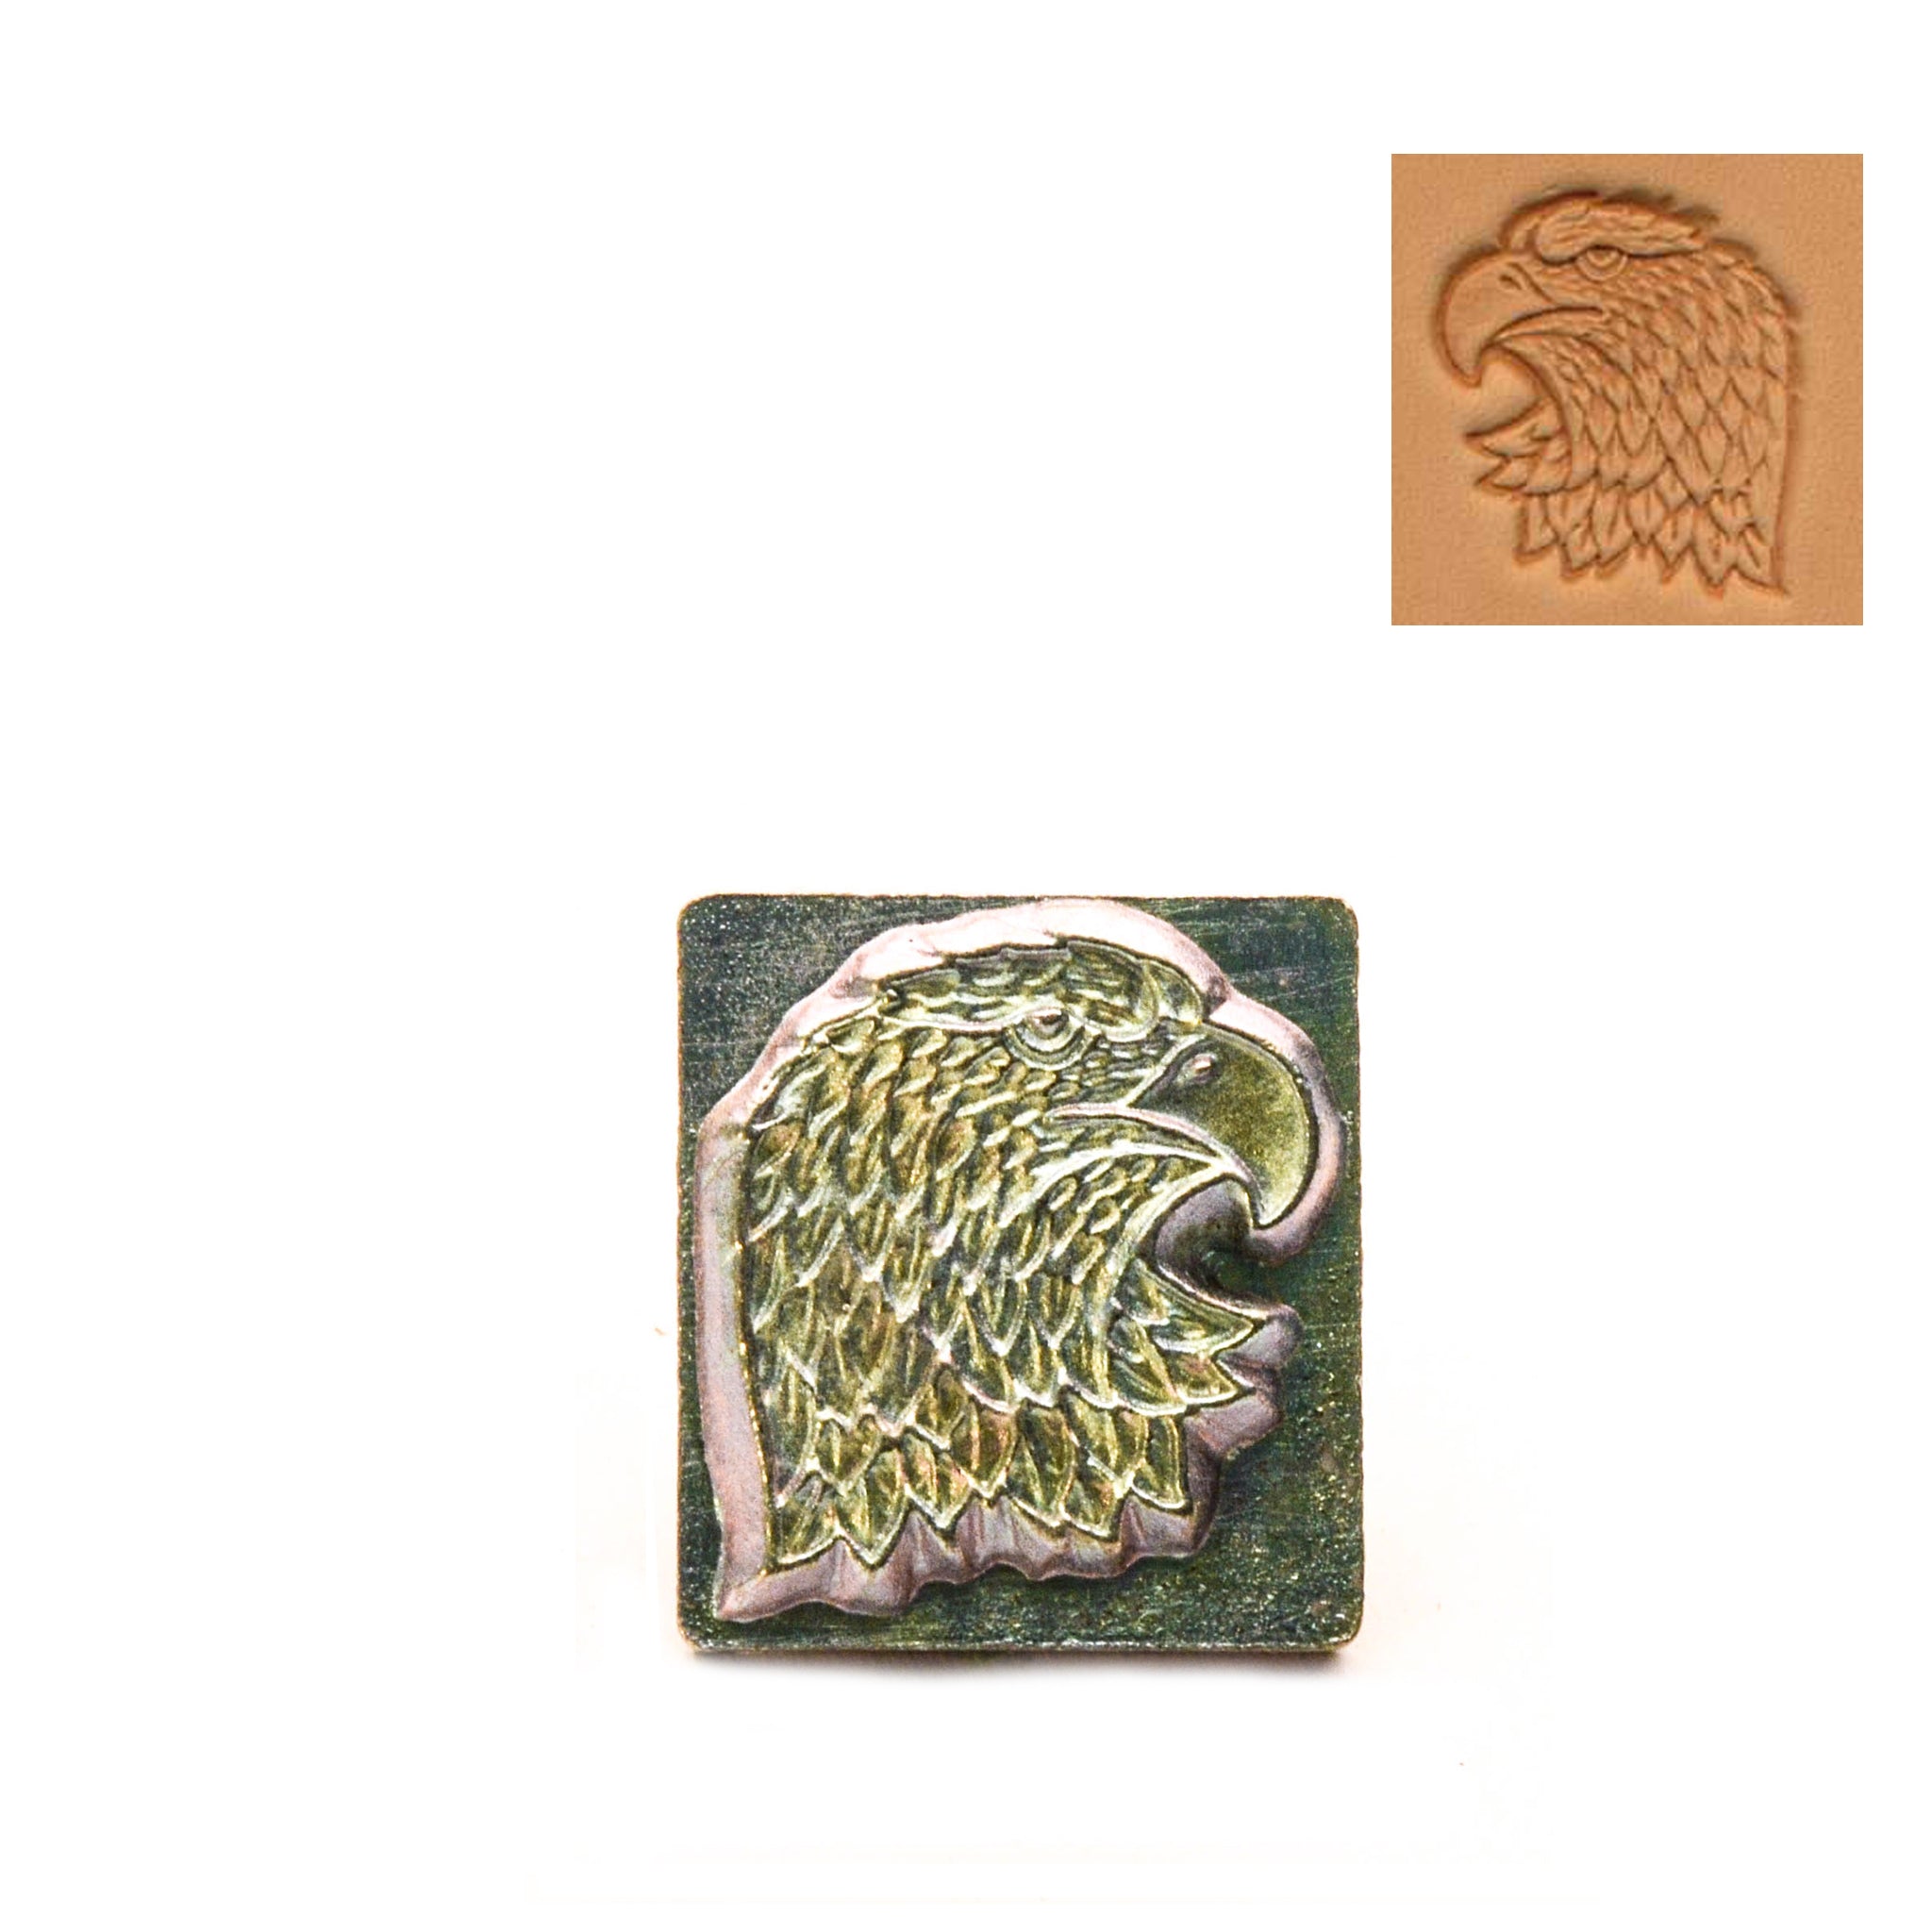 Eagle Head 3D Embossing Stamp - Left from Identity Leathercraft